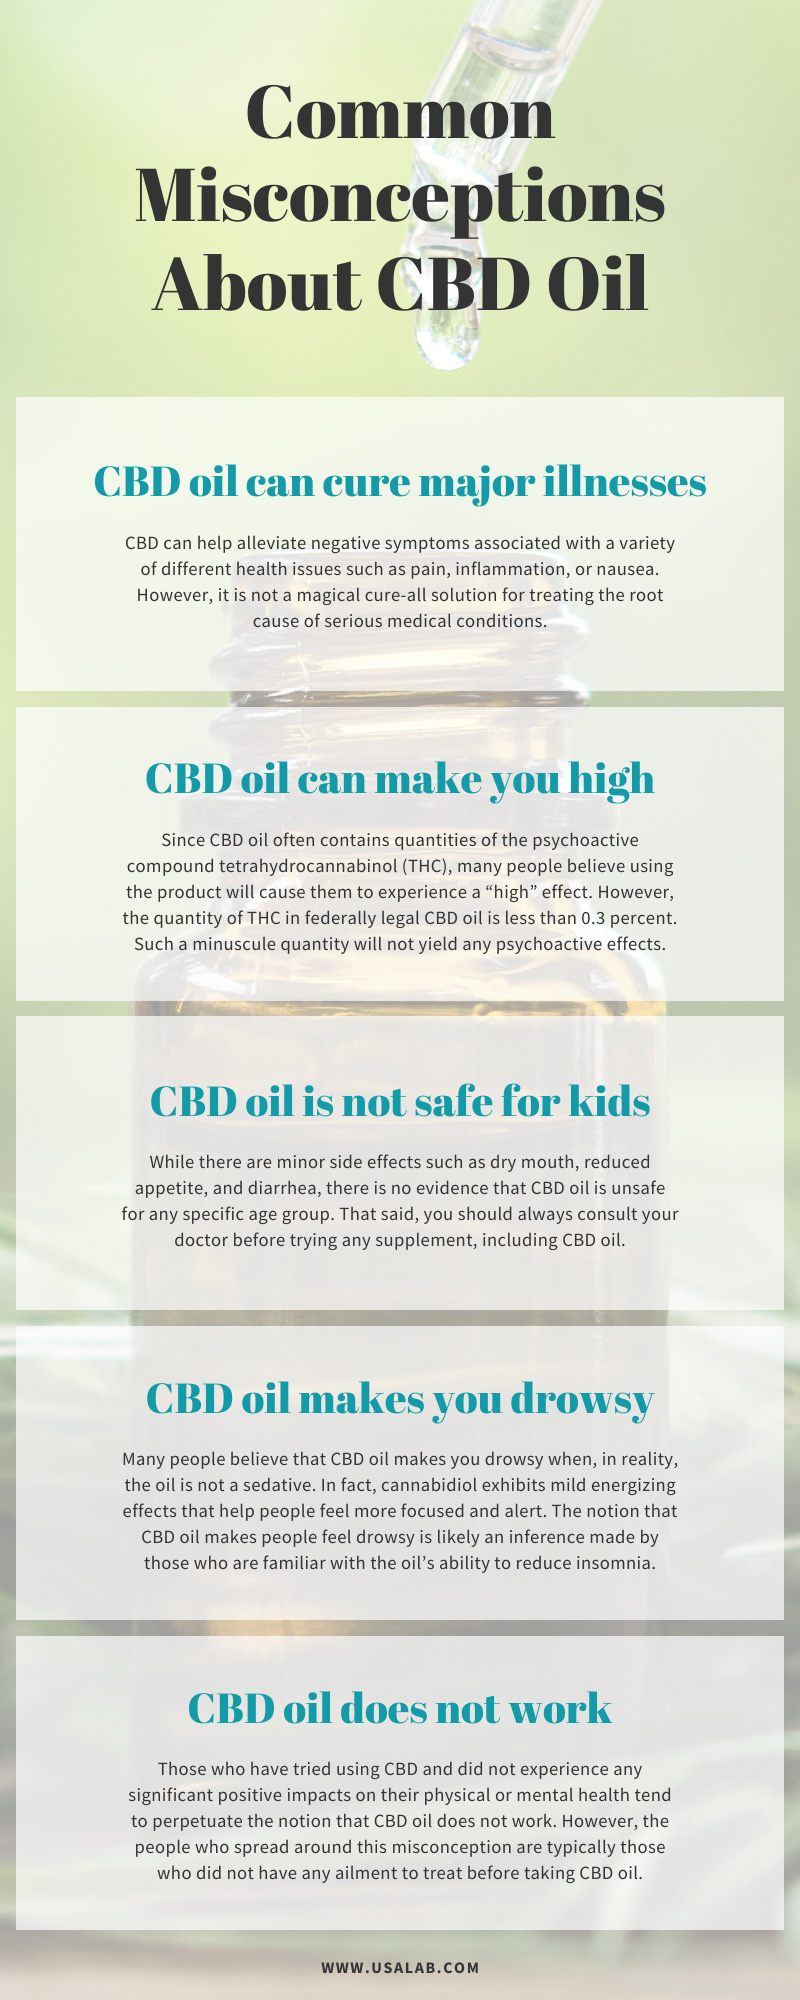 Common Misconceptions About CBD Oil infographic